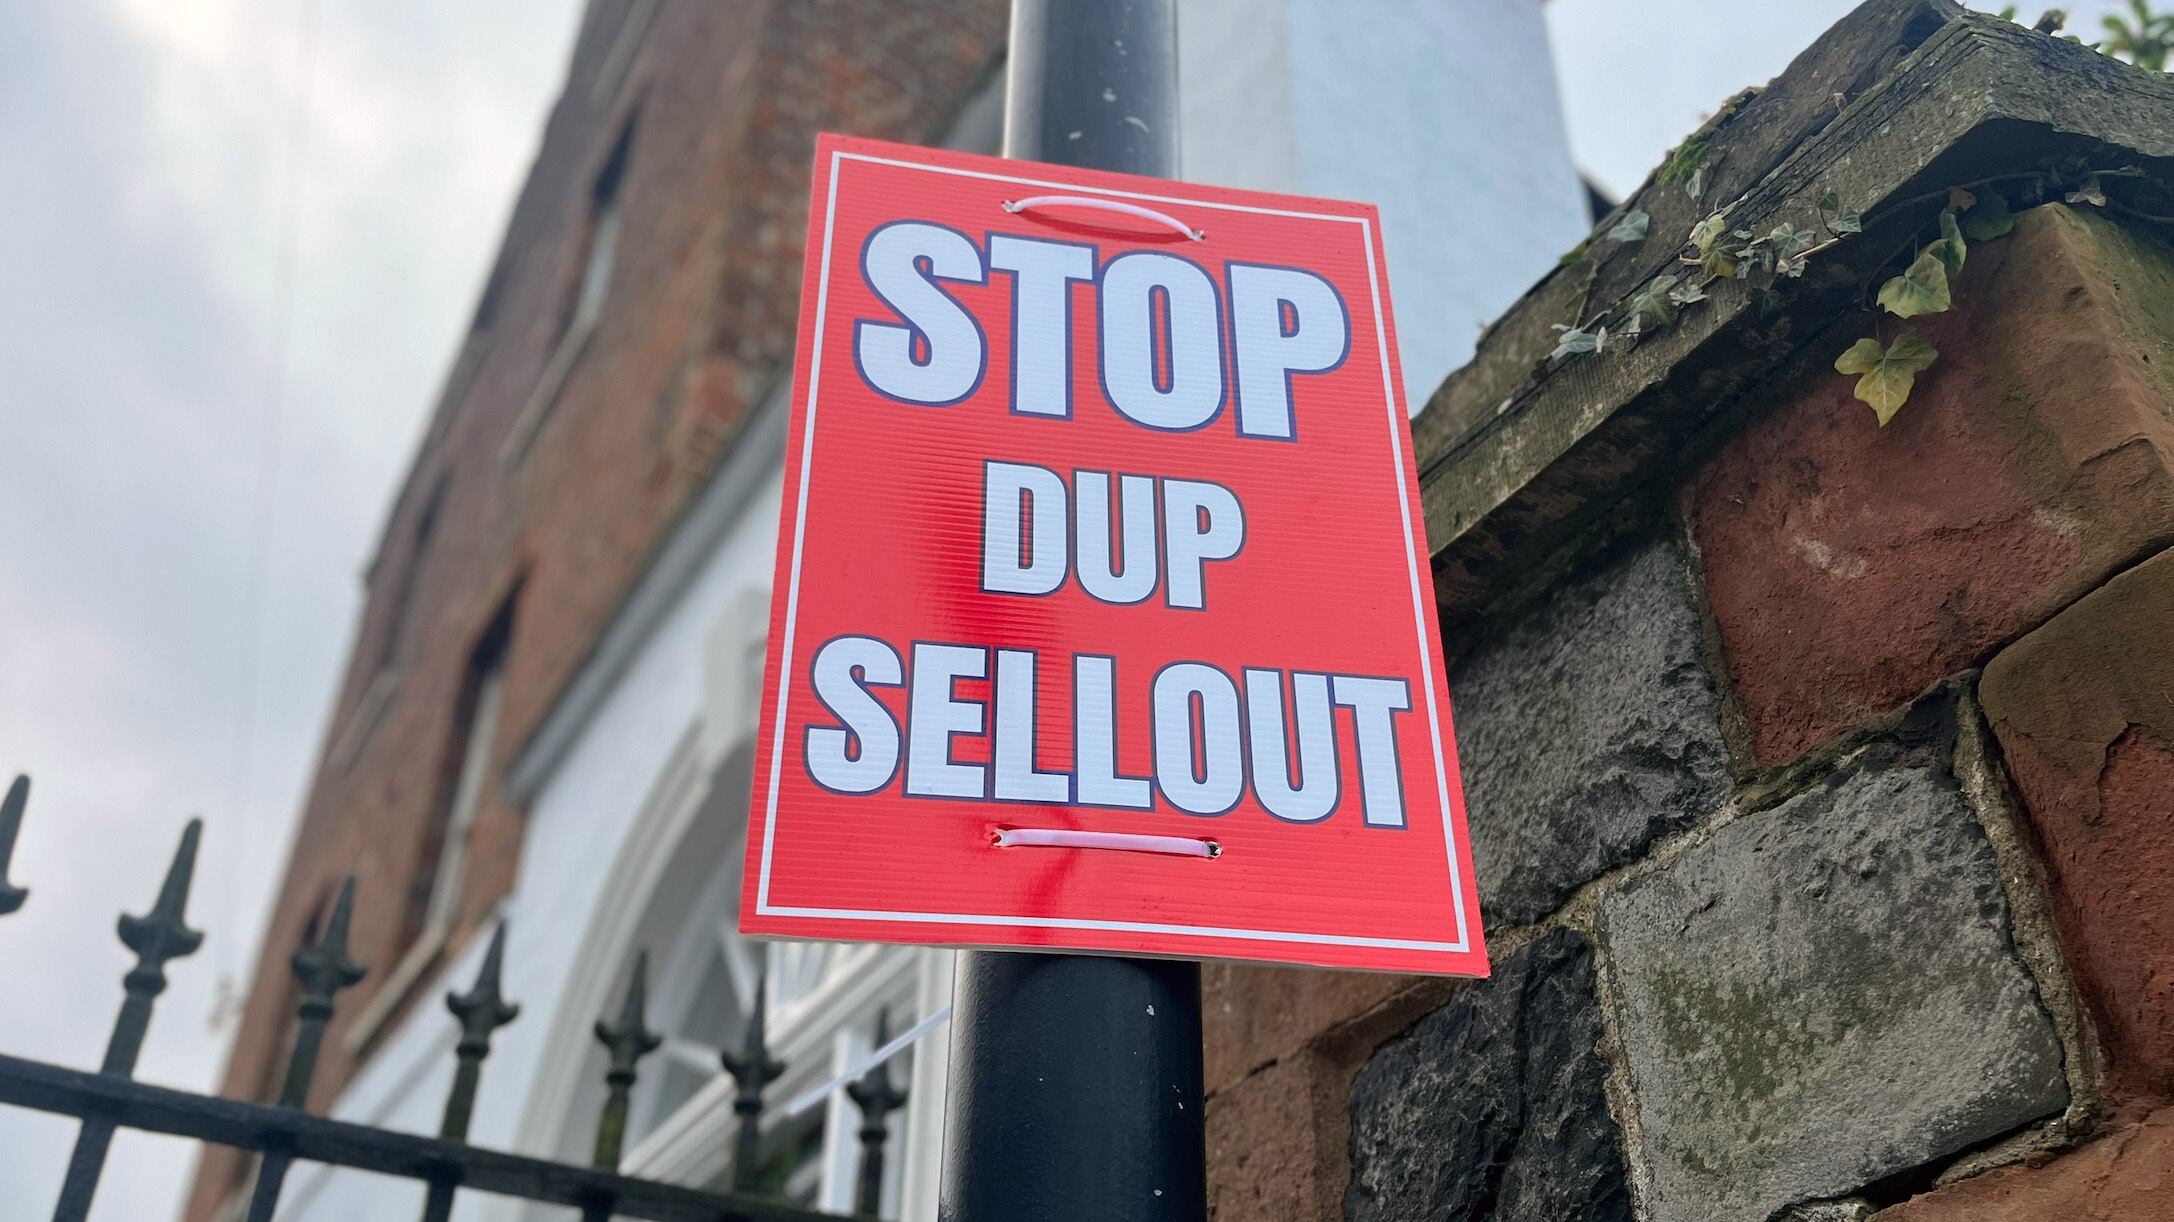 A poster stating ‘Stop DUP sellout’ on a lamp post near Hillsborough Castle, where representatives from the Northern Ireland political parties are meeting for further talks with the Government on a financial package for the region